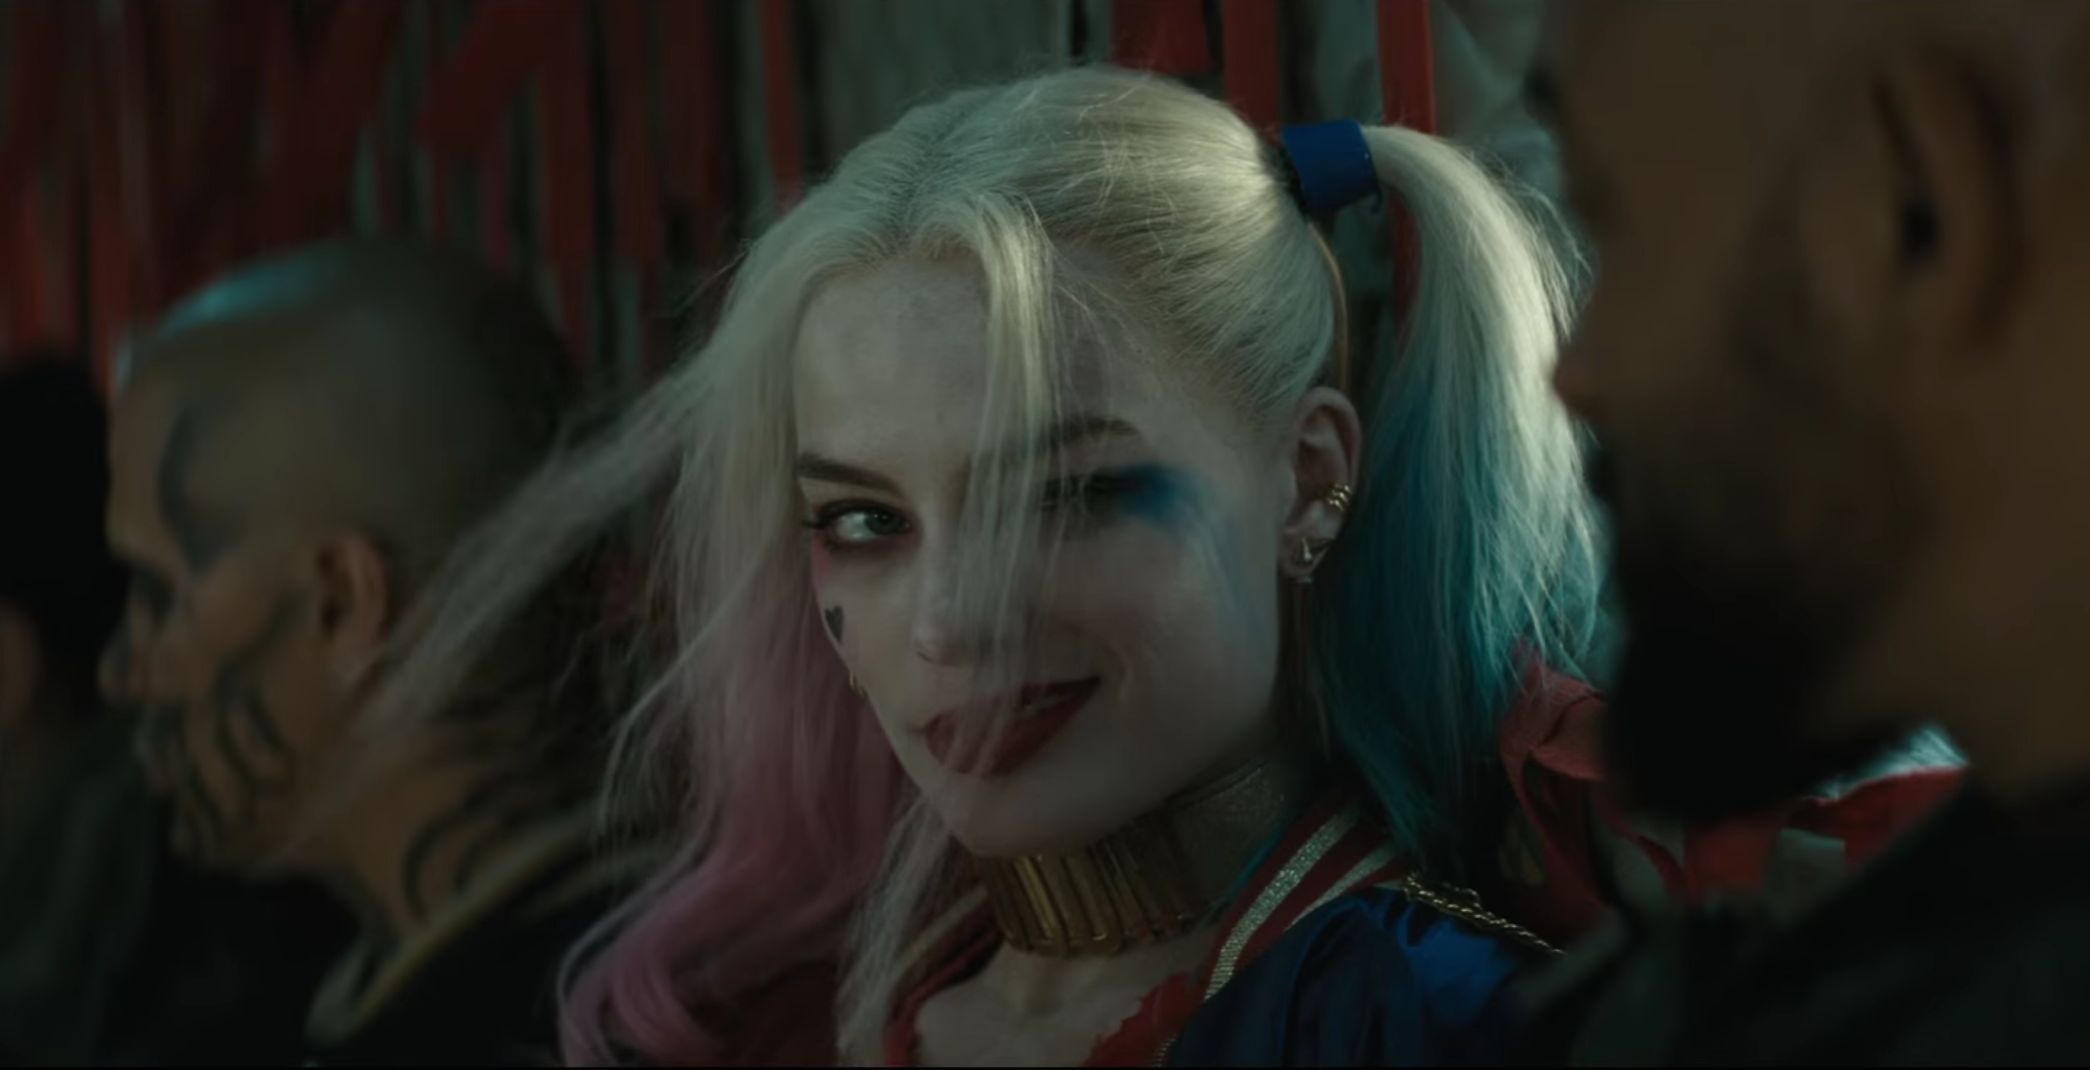 harley quinn, movie, suicide squad, margot robbie, two toned hair, wink for android